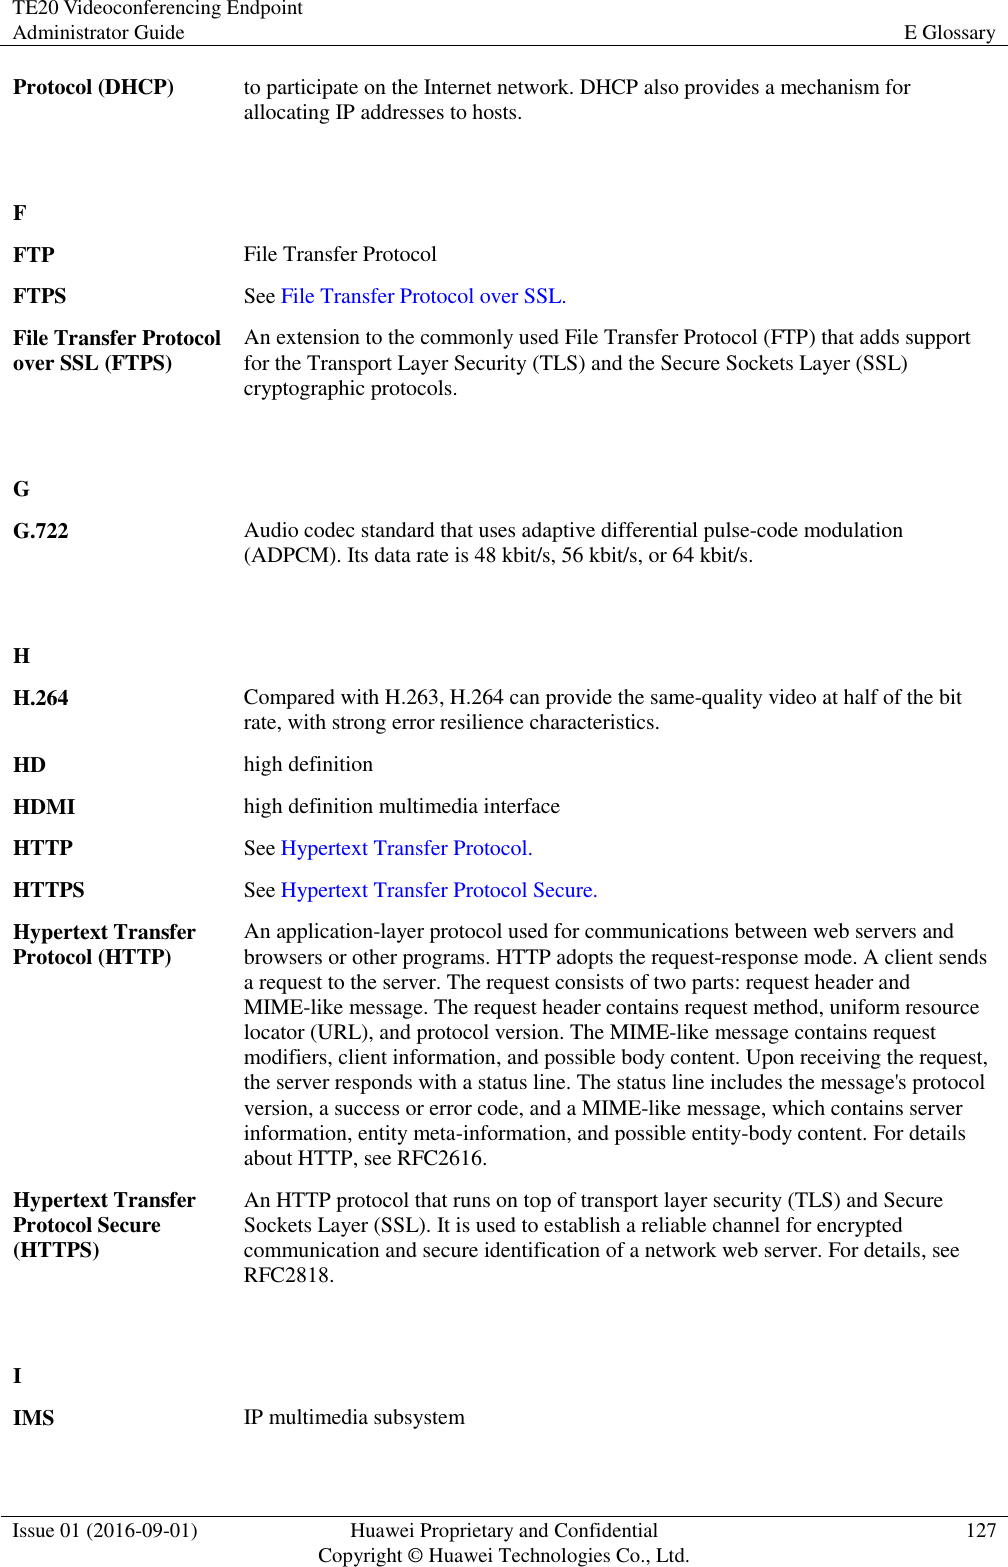 TE20 Videoconferencing Endpoint Administrator Guide E Glossary  Issue 01 (2016-09-01) Huawei Proprietary and Confidential                                     Copyright © Huawei Technologies Co., Ltd. 127  Protocol (DHCP) to participate on the Internet network. DHCP also provides a mechanism for allocating IP addresses to hosts.   F  FTP File Transfer Protocol FTPS See File Transfer Protocol over SSL. File Transfer Protocol over SSL (FTPS) An extension to the commonly used File Transfer Protocol (FTP) that adds support for the Transport Layer Security (TLS) and the Secure Sockets Layer (SSL) cryptographic protocols.   G  G.722 Audio codec standard that uses adaptive differential pulse-code modulation (ADPCM). Its data rate is 48 kbit/s, 56 kbit/s, or 64 kbit/s.   H  H.264 Compared with H.263, H.264 can provide the same-quality video at half of the bit rate, with strong error resilience characteristics. HD high definition HDMI high definition multimedia interface HTTP See Hypertext Transfer Protocol. HTTPS See Hypertext Transfer Protocol Secure. Hypertext Transfer Protocol (HTTP) An application-layer protocol used for communications between web servers and browsers or other programs. HTTP adopts the request-response mode. A client sends a request to the server. The request consists of two parts: request header and MIME-like message. The request header contains request method, uniform resource locator (URL), and protocol version. The MIME-like message contains request modifiers, client information, and possible body content. Upon receiving the request, the server responds with a status line. The status line includes the message&apos;s protocol version, a success or error code, and a MIME-like message, which contains server information, entity meta-information, and possible entity-body content. For details about HTTP, see RFC2616. Hypertext Transfer Protocol Secure (HTTPS) An HTTP protocol that runs on top of transport layer security (TLS) and Secure Sockets Layer (SSL). It is used to establish a reliable channel for encrypted communication and secure identification of a network web server. For details, see RFC2818.   I  IMS IP multimedia subsystem 